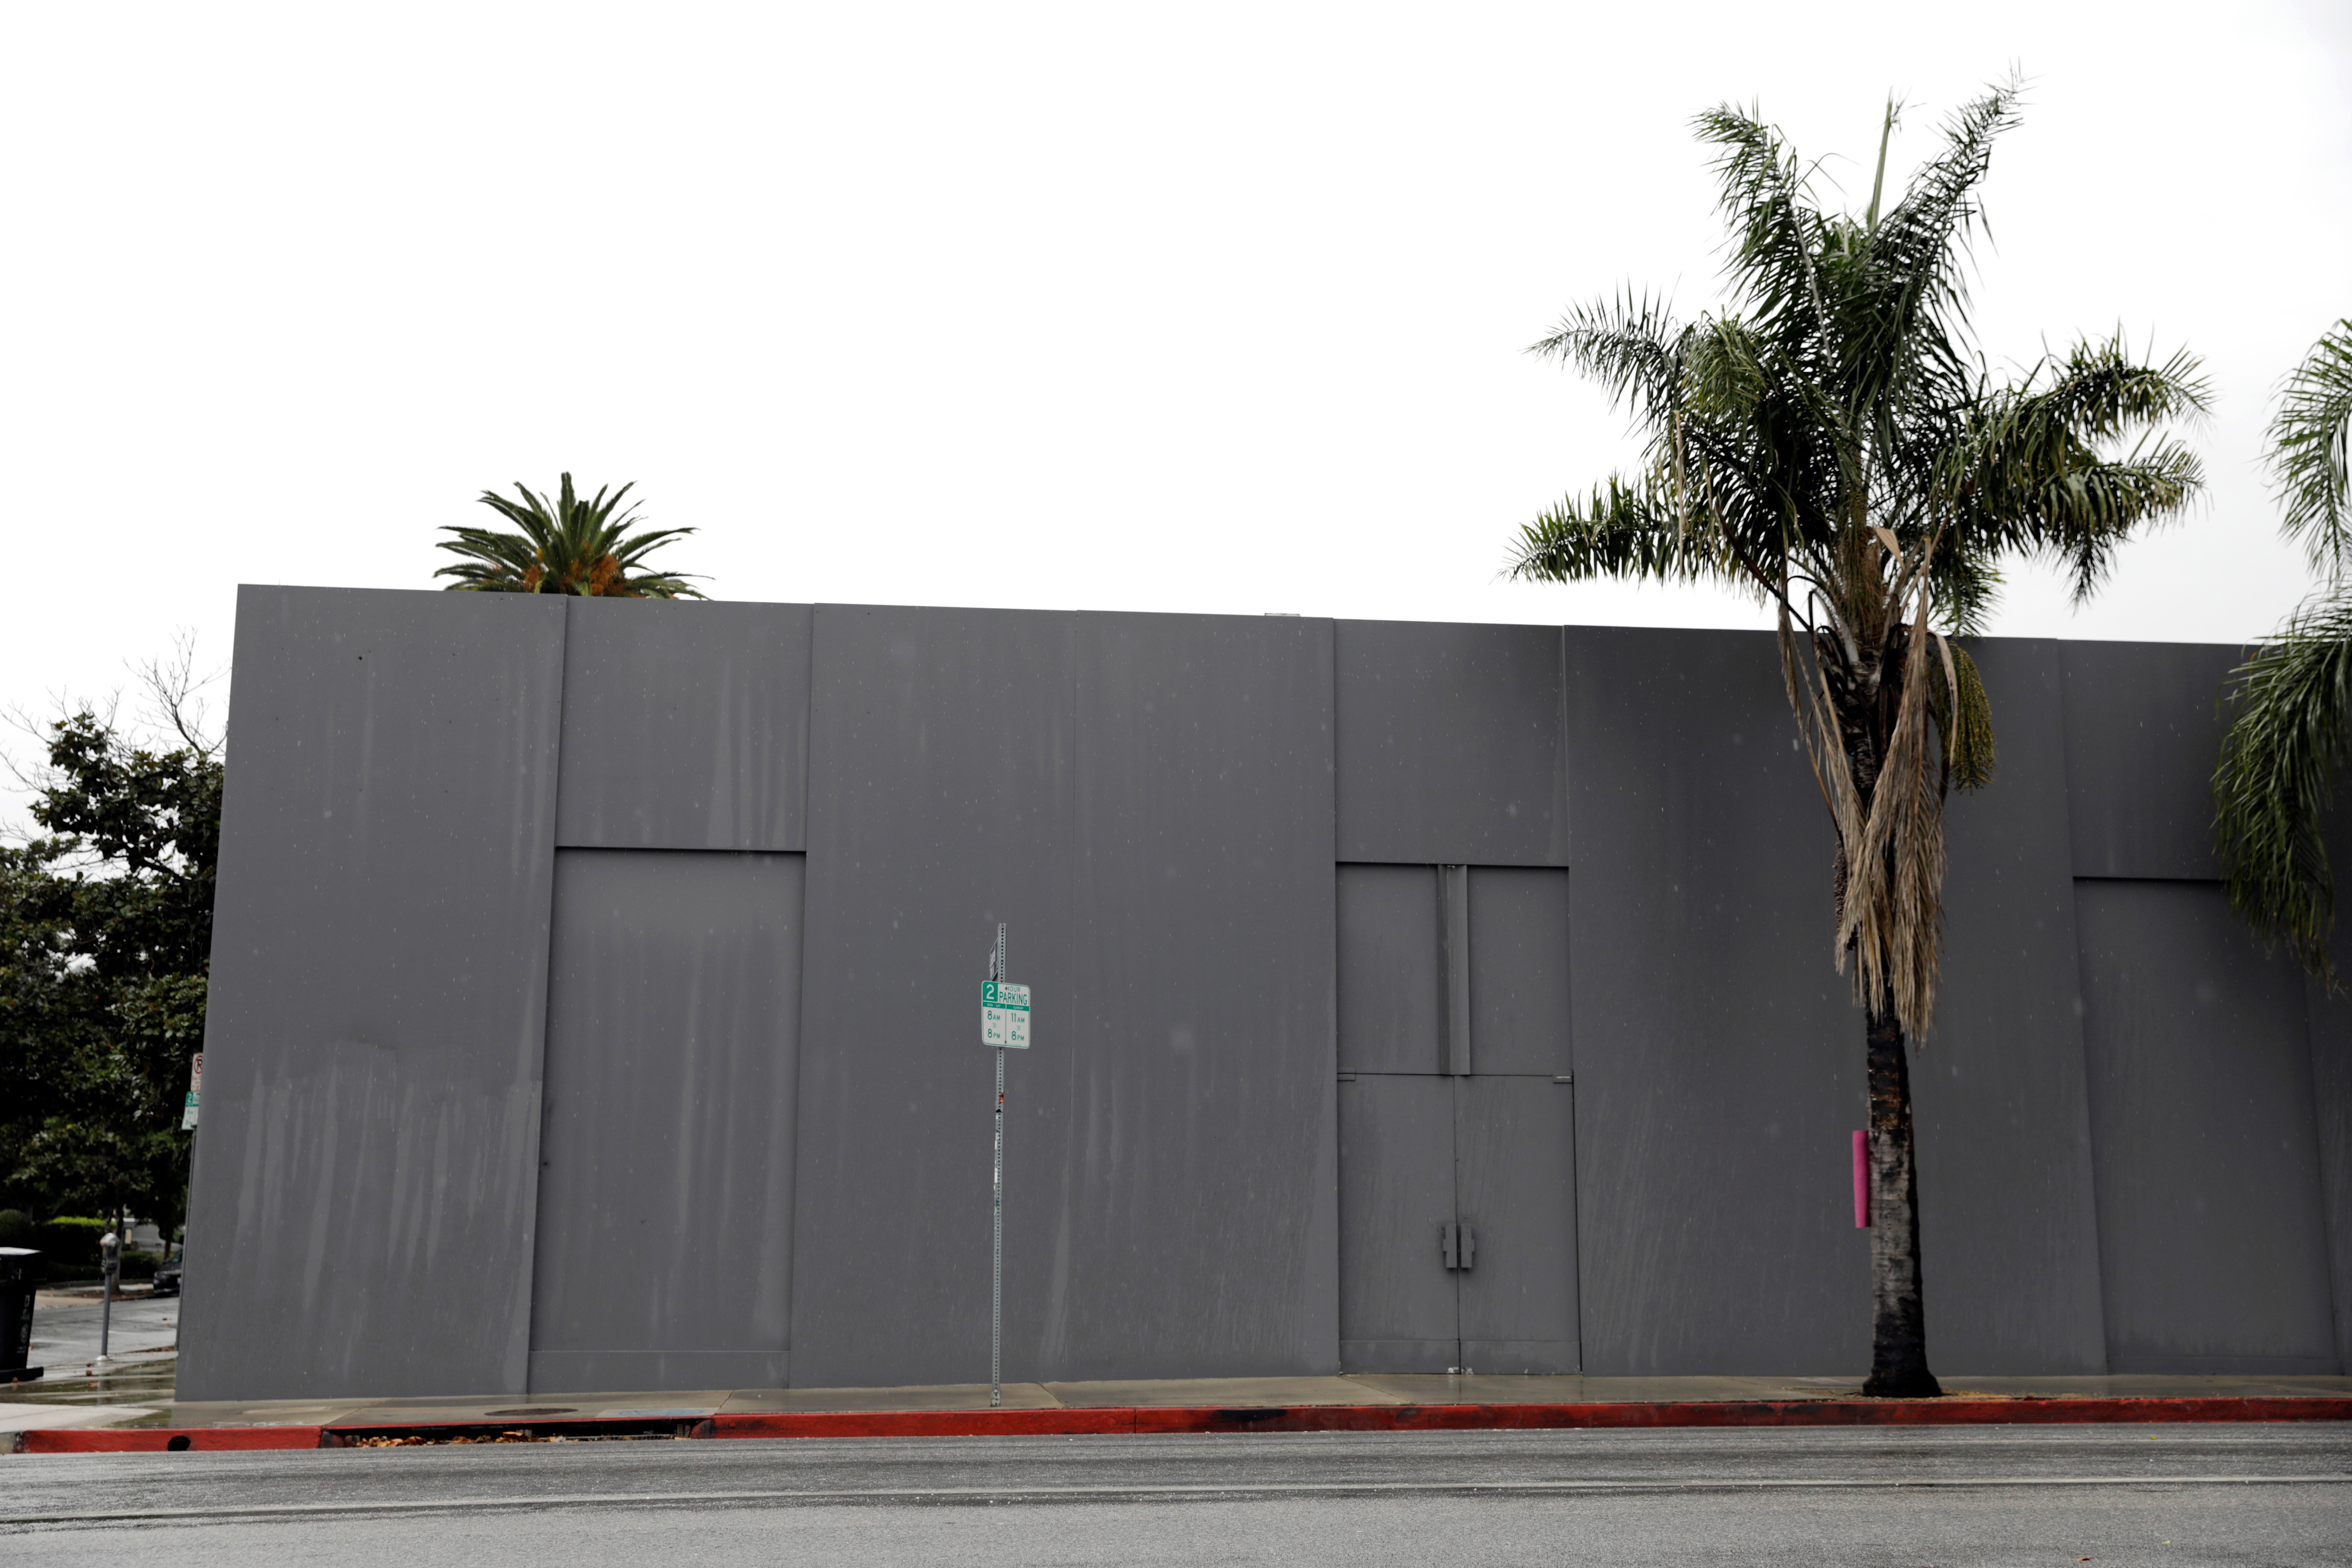 The rapper's huge Yeezy HQ on Melrose Avenue in Westhollywood was painted grey